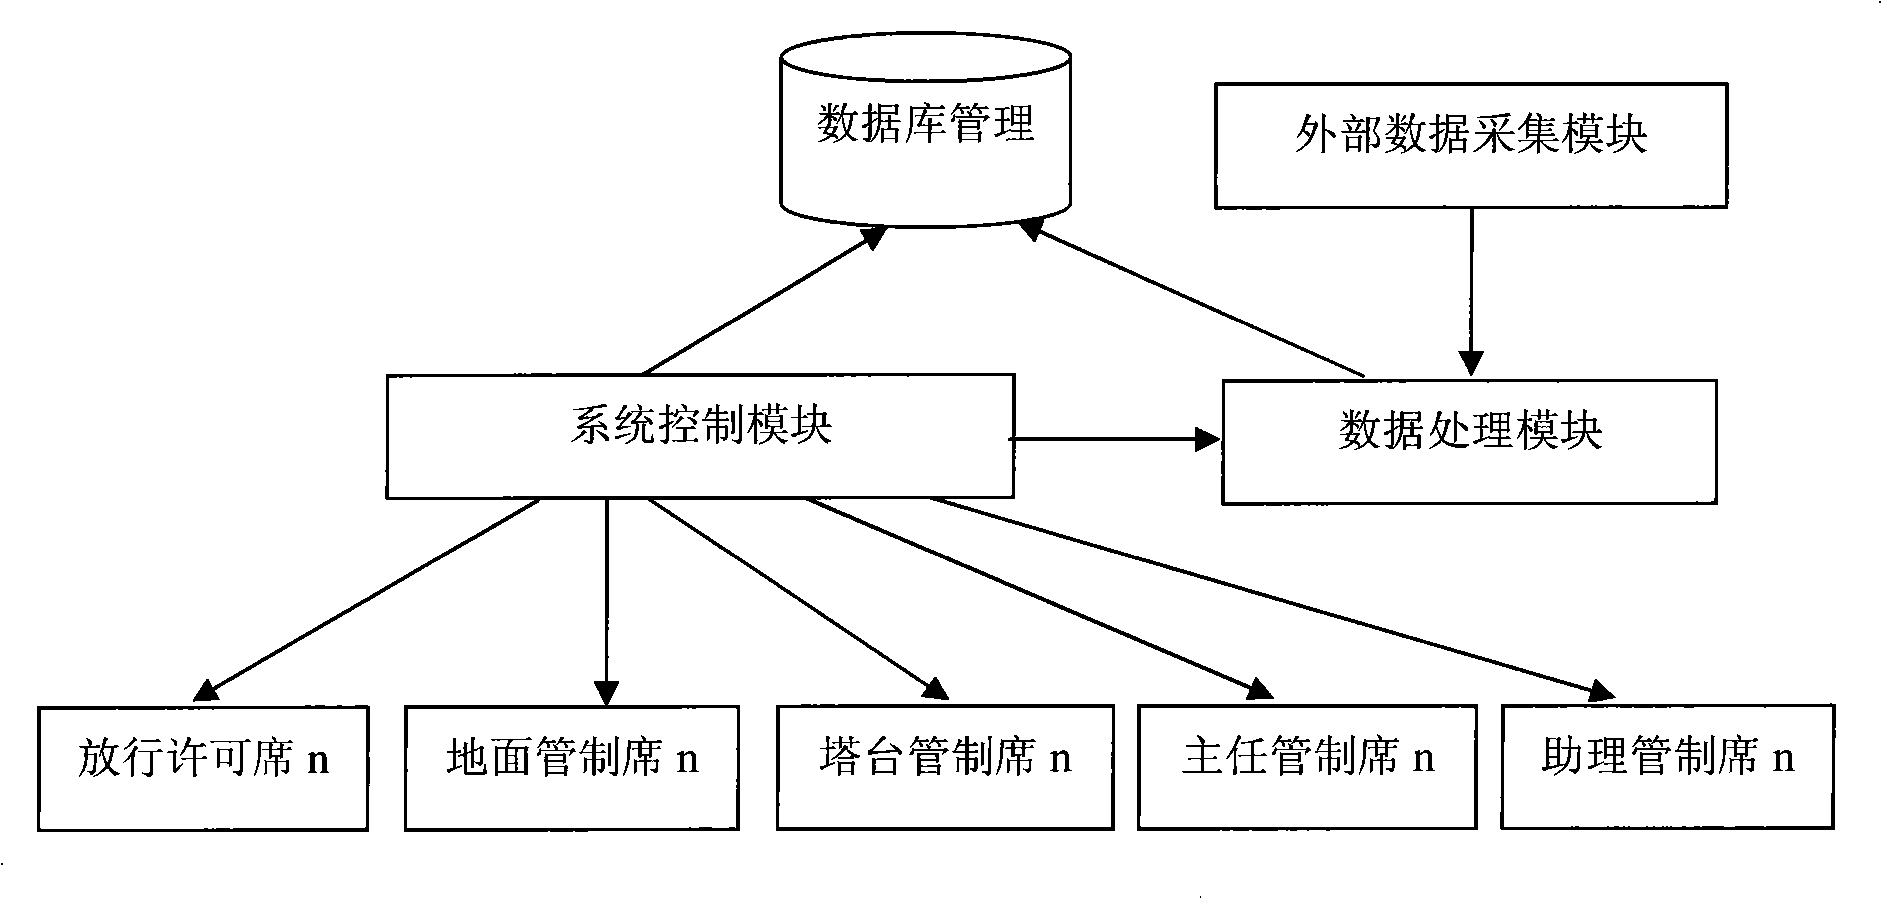 Screen control and handover method based on an electronic flight strip